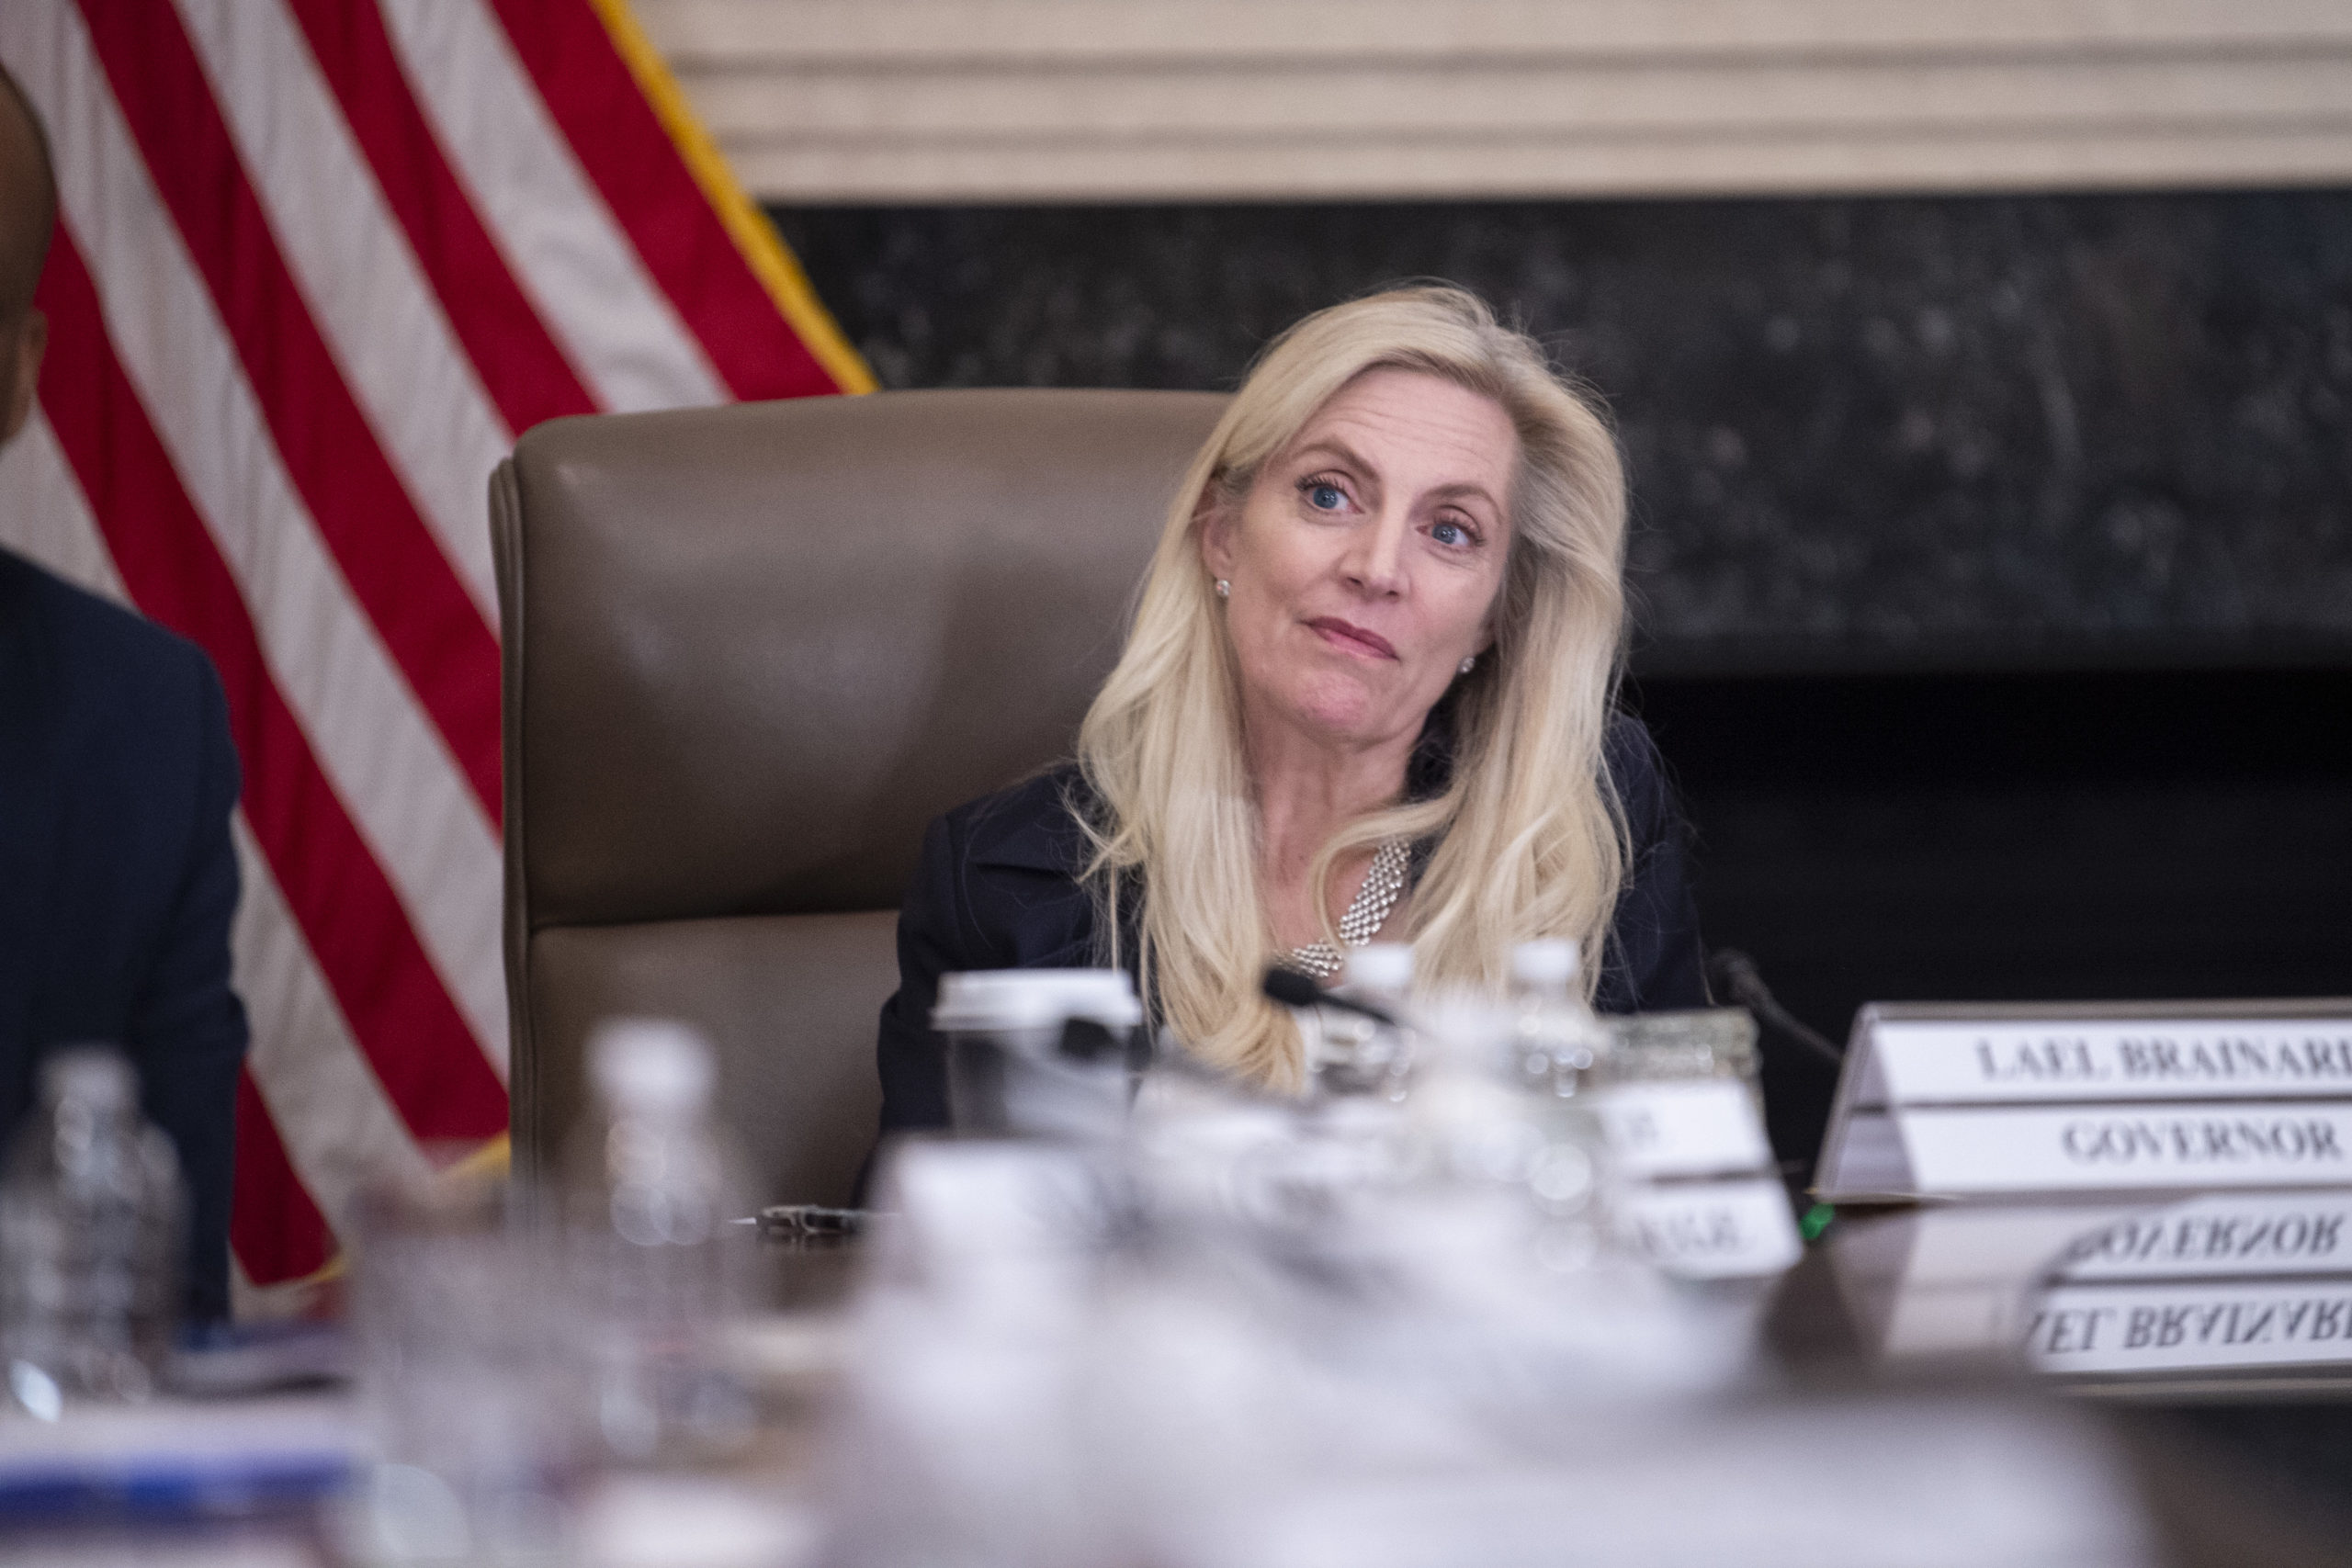 US Federal Reserve Governor Lael Brainard attends a "Fed Listens" event at the Federal Reserve headquarters in Washington, DC, on October 4, 2019. (Photo by Eric BARADAT / AFP) (Photo by ERIC BARADAT/AFP via Getty Images)